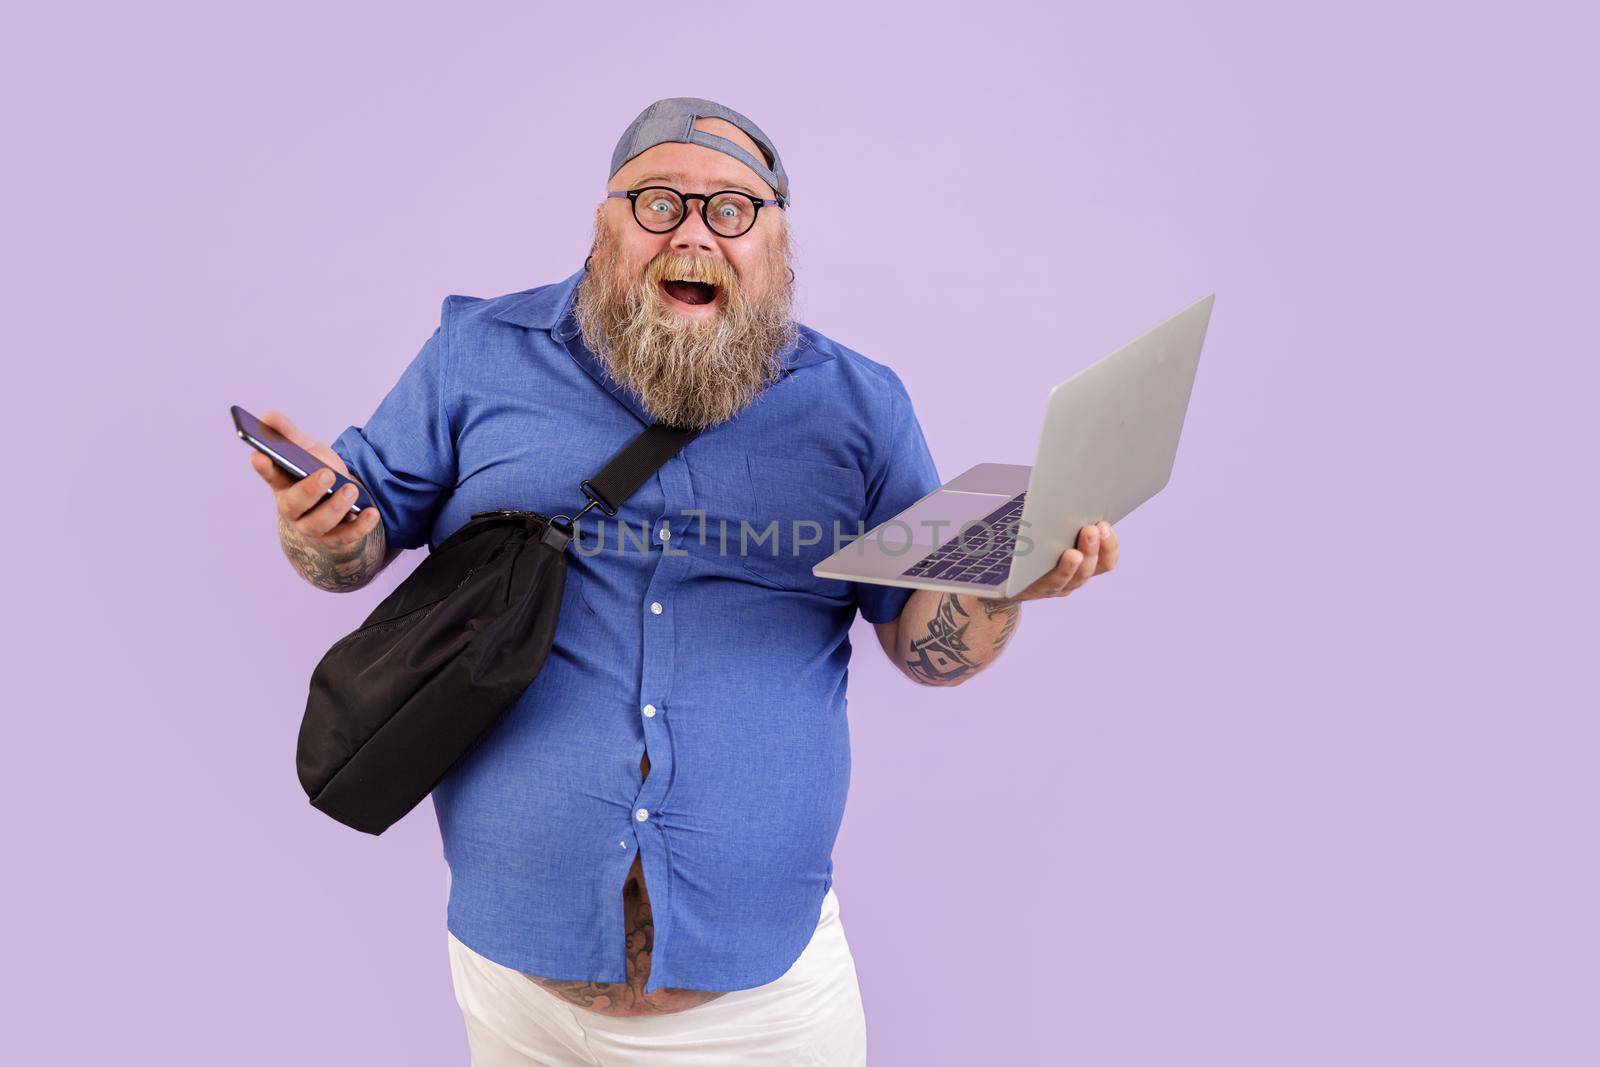 Expressive happy obese man with crossbody bag holds cellphone and contemporary open laptop standing on purple background in studio